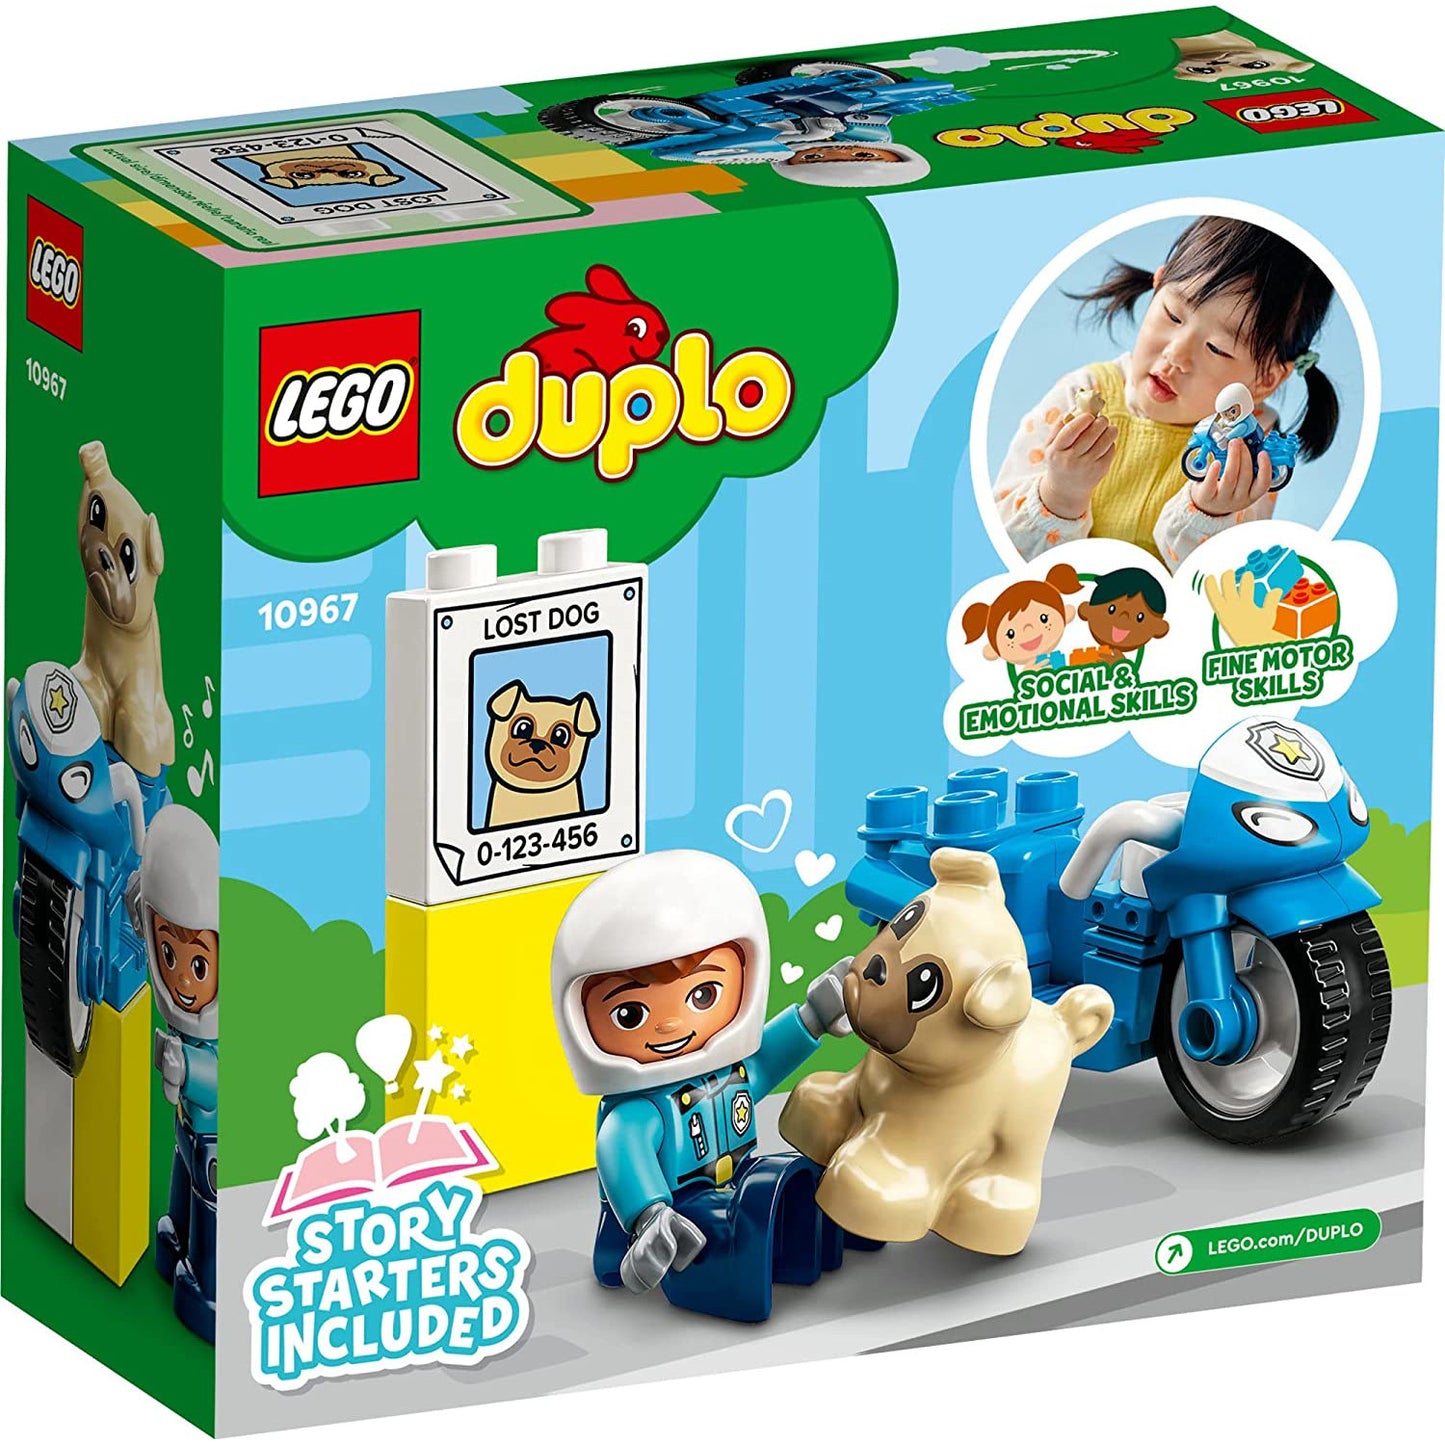 DUPLO by LEGO Police Motorcycle 10967 4